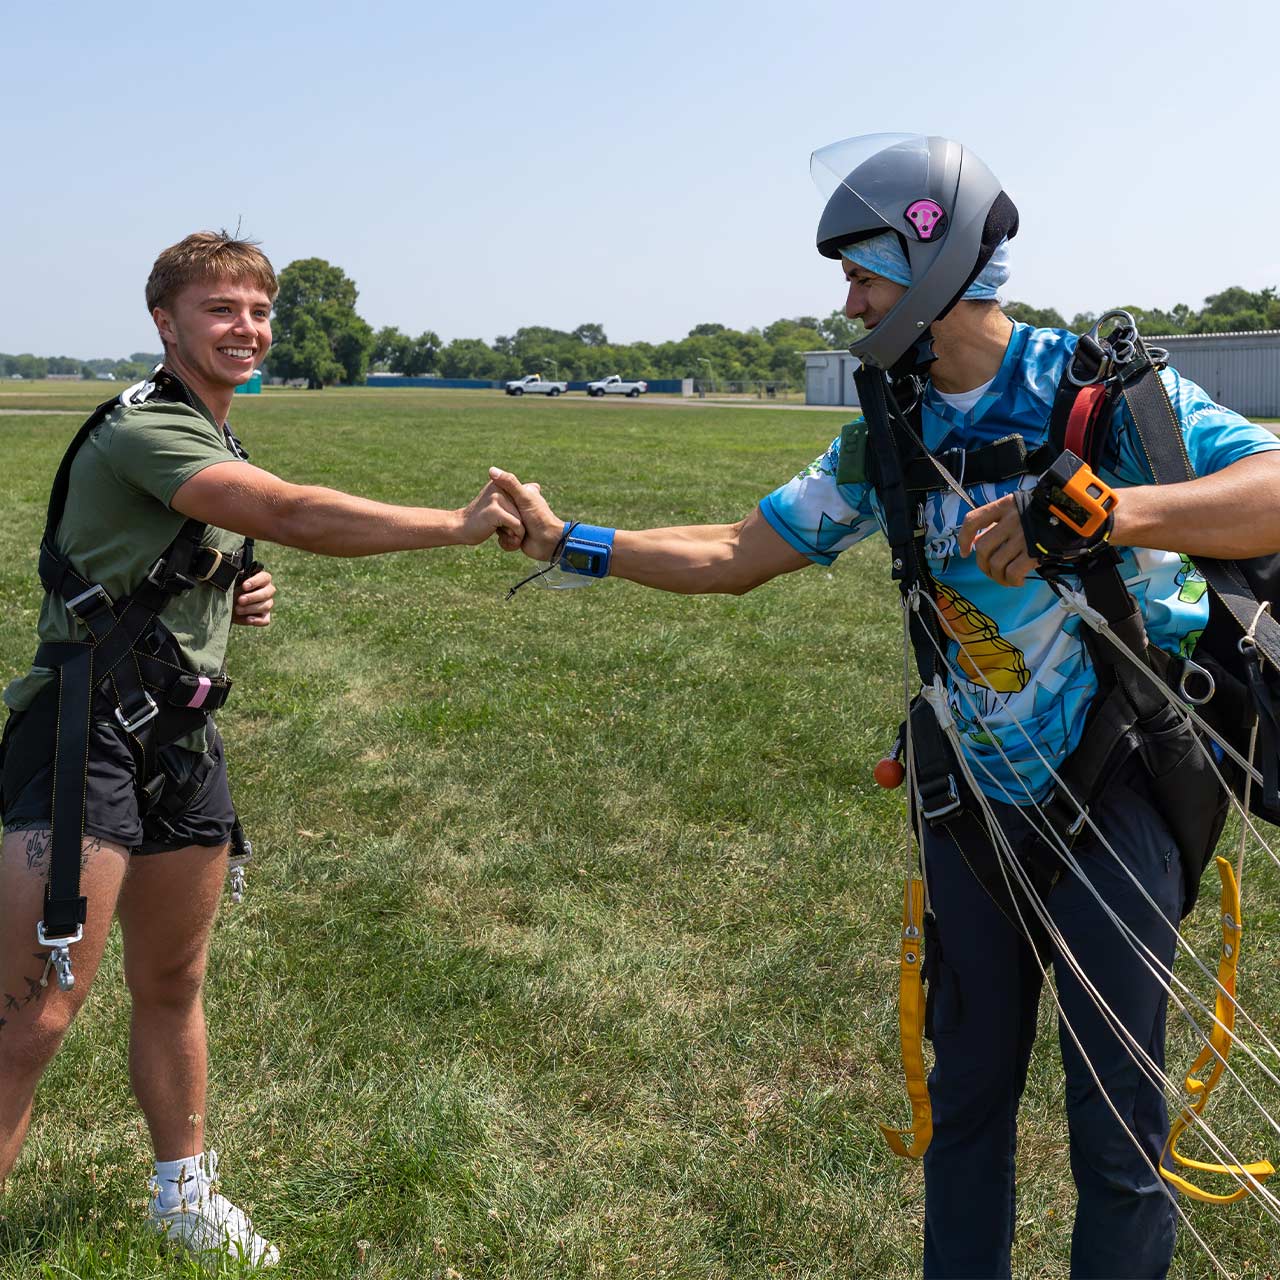 Tandem skydiving student and their instructor fist bumping after landing.